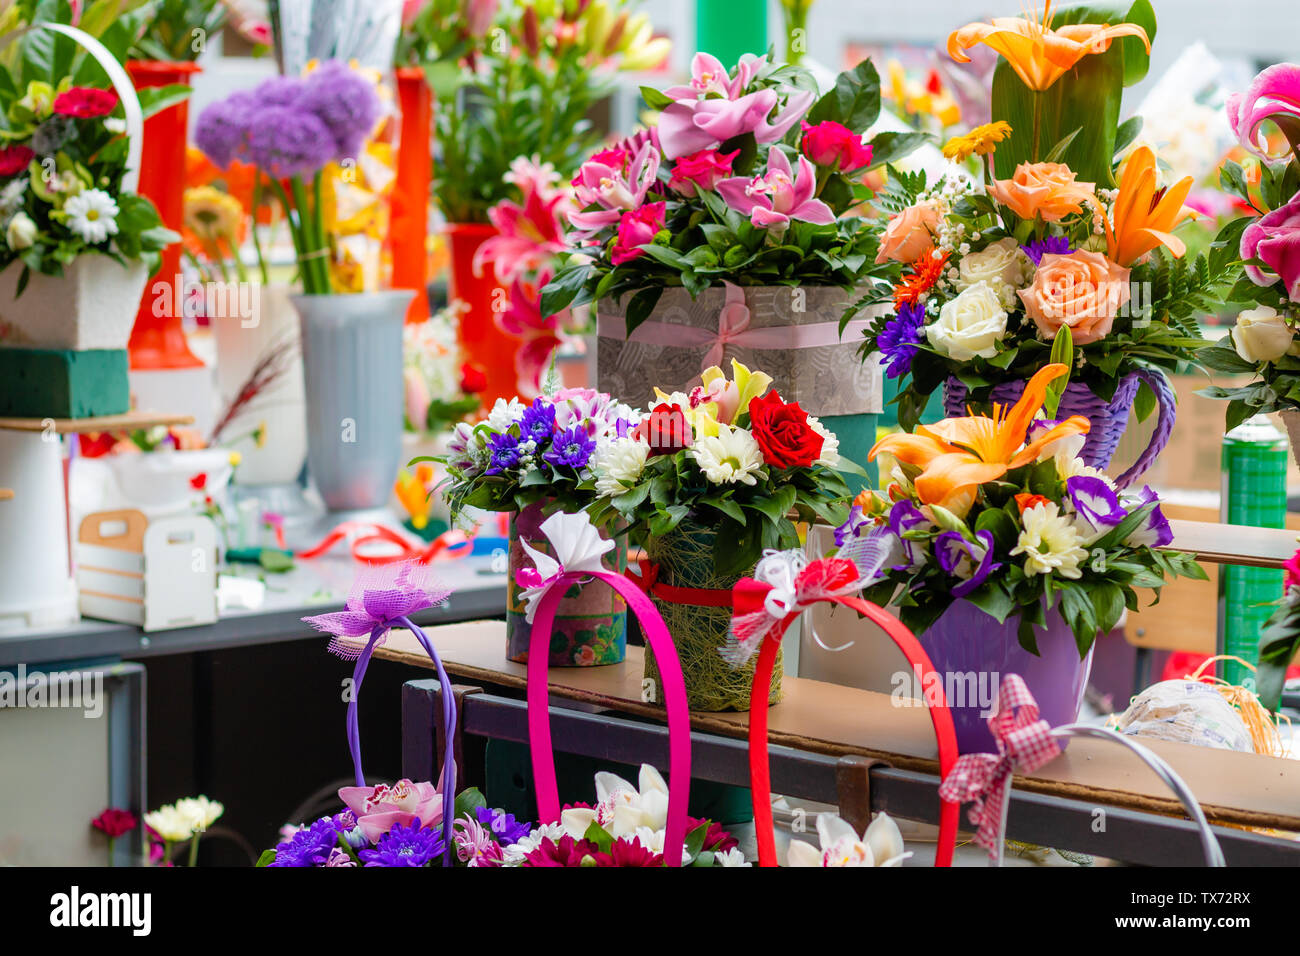 Various flower arrangements in small decorative pots on the marketplace counter in Belgrade. Stock Photo